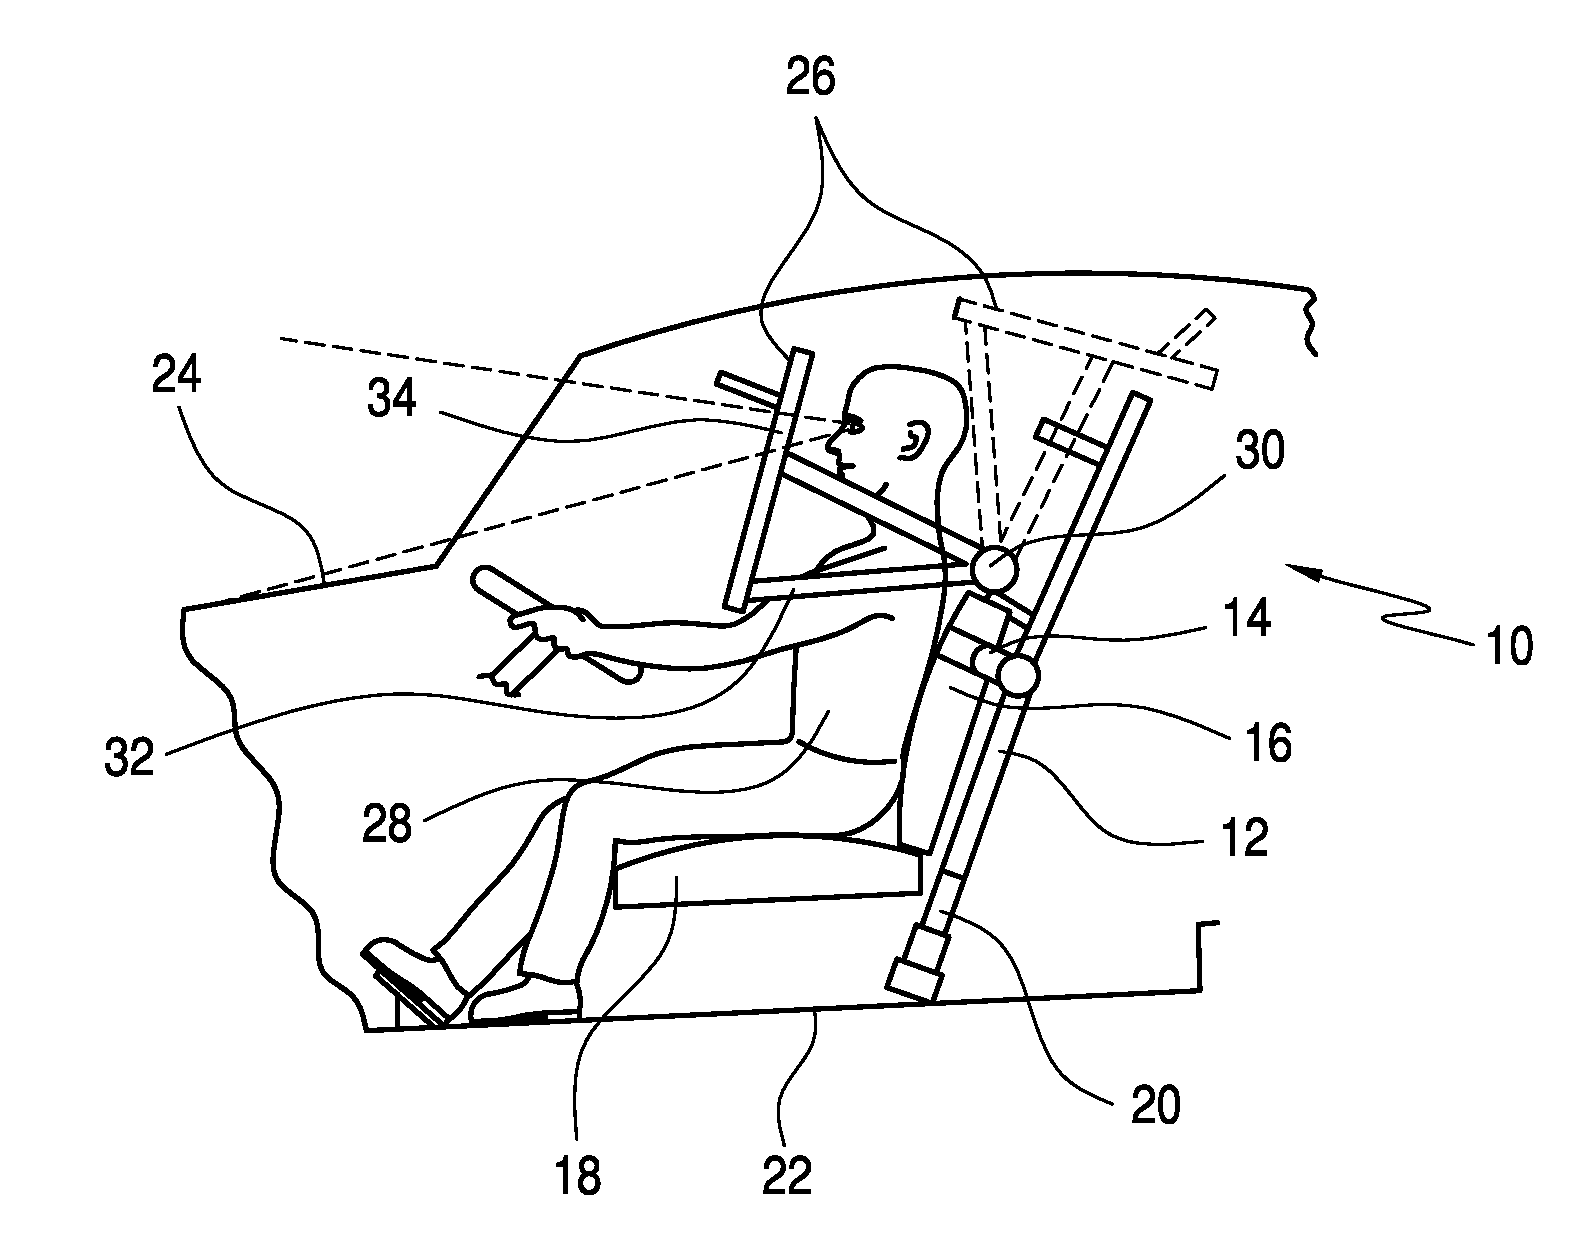 Personal protection apparatus for vehicles